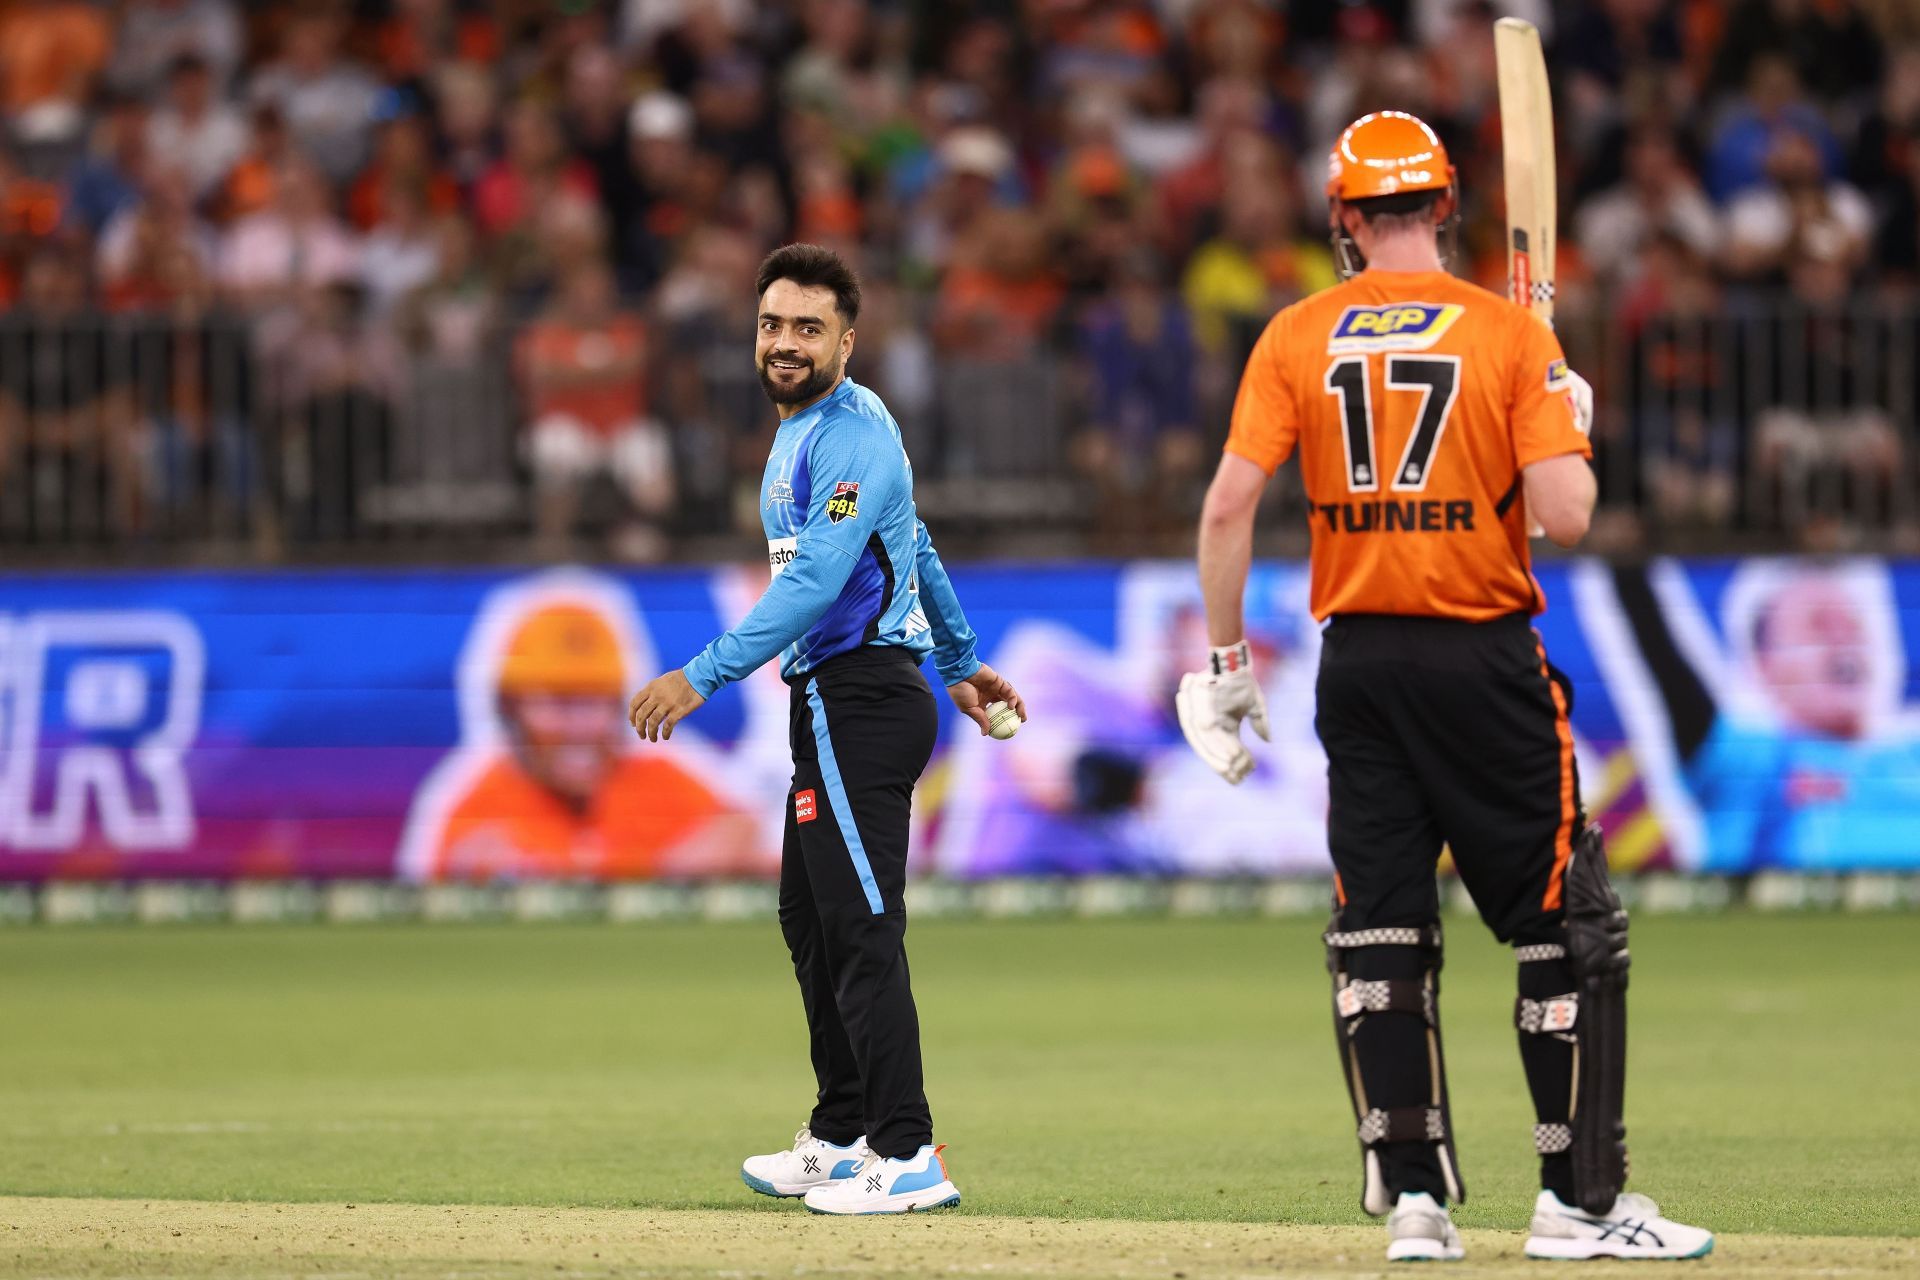 Rashid Khan of the Strikers exchanges words with Ashton Turner of the Scorchers. Pic: Getty Images